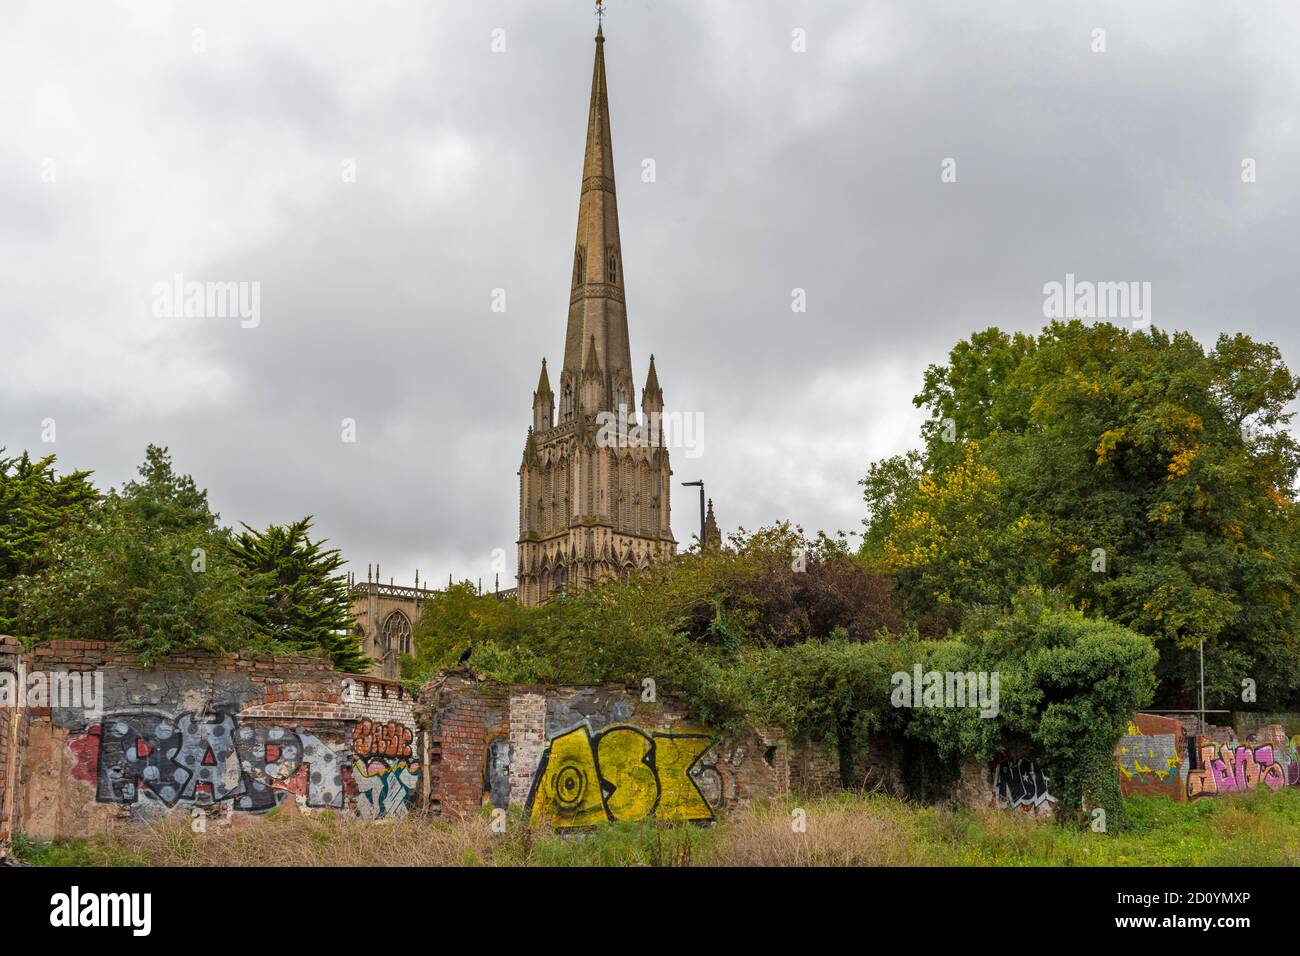 BRISTOL CITY ENGLAND ST.MARY REDCLIFFE CHURCH AND GRAFFITI ART ON THE OLD WALLS Stock Photo